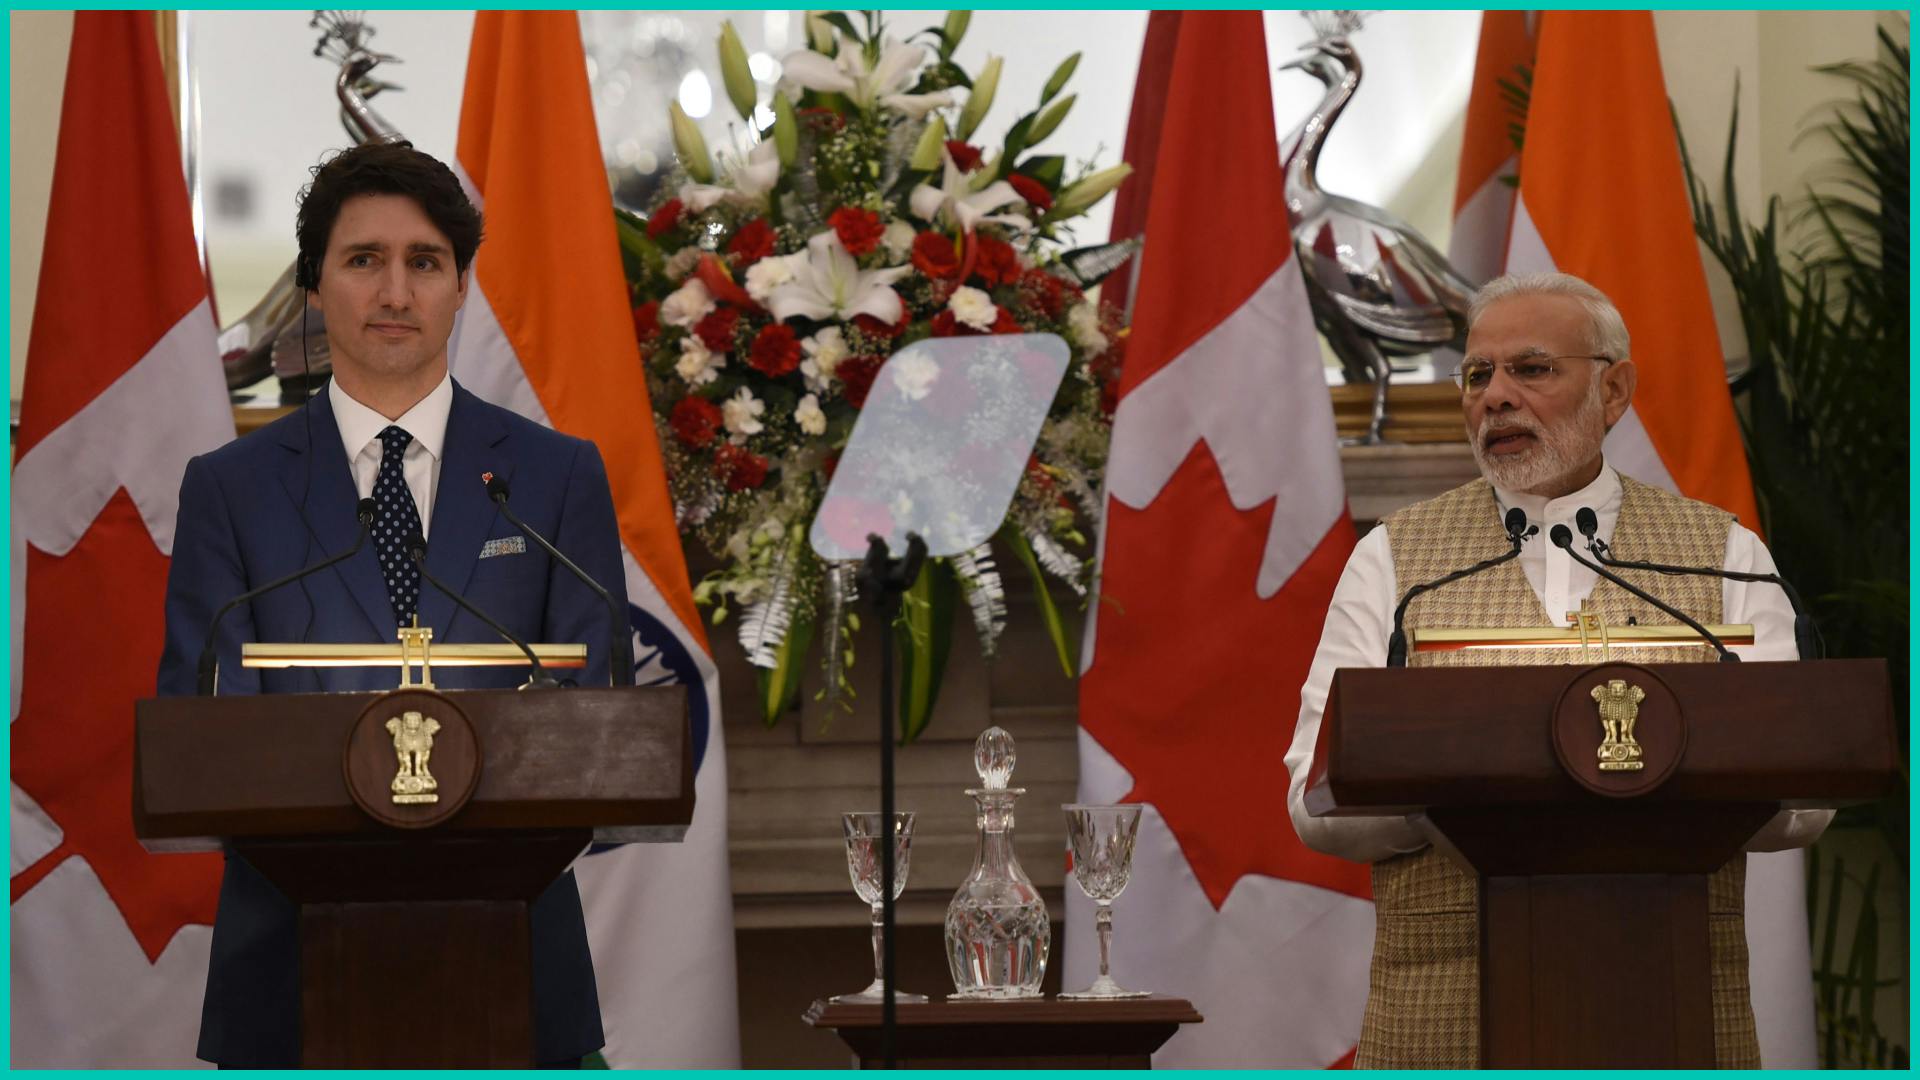 Indian Prime Minister Narendra Modi (R) speaks as Canadian Prime Minister Justin Trudeau looks on at a joint press statement at Hyderabad House in New Delhi